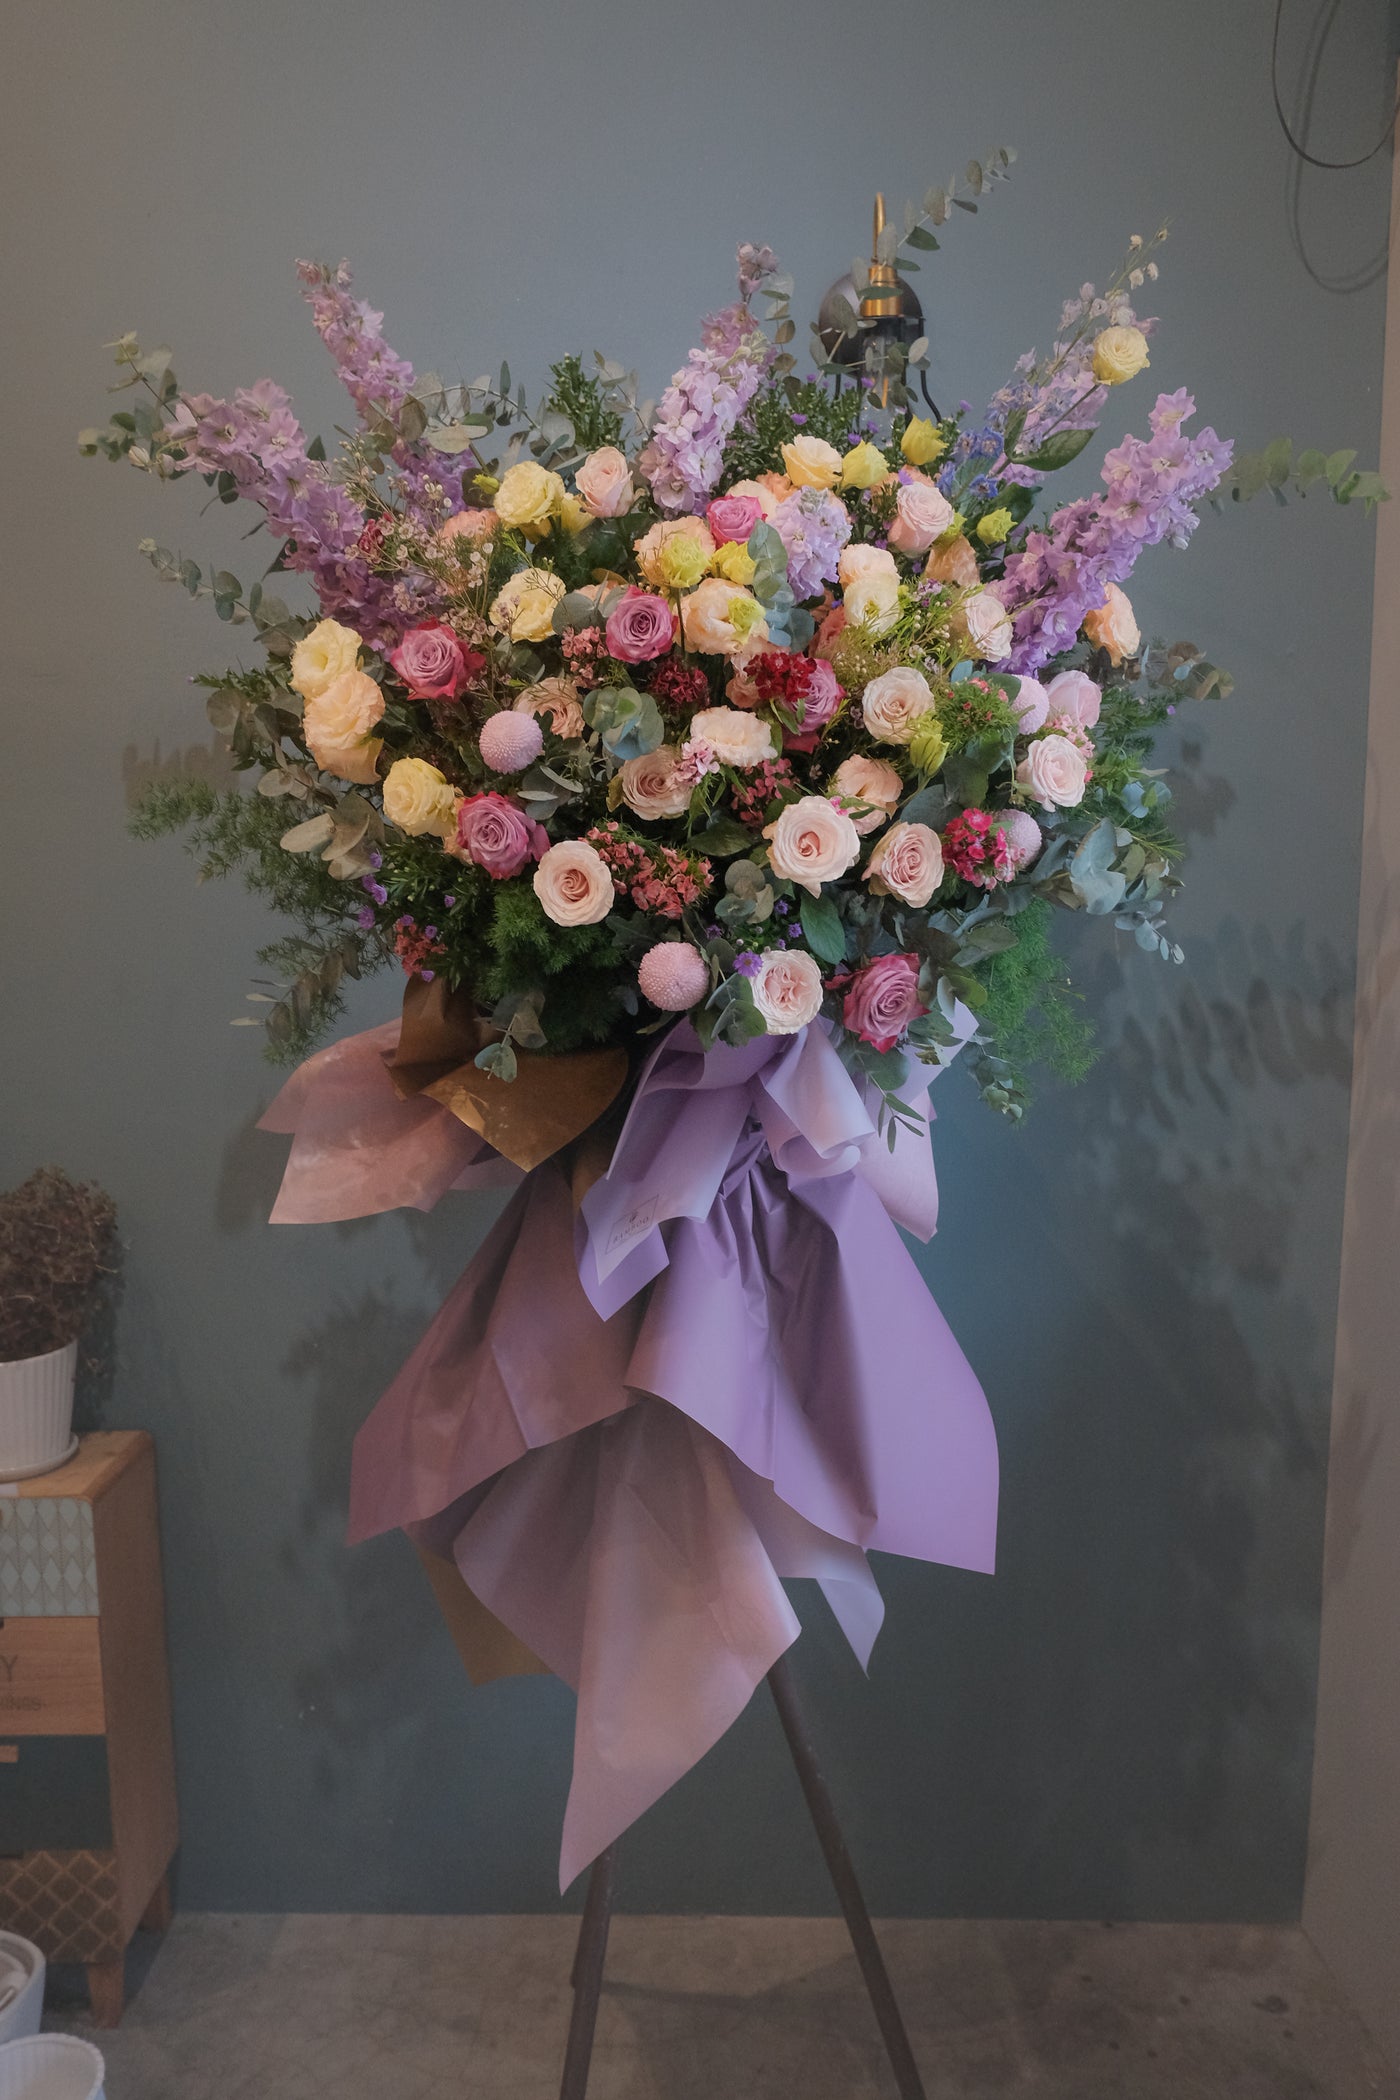 A medley of flowers arrangement for congratulatory or joyful event. For same day grand opening congratulations flowers delivery in Penang and Butterworth.